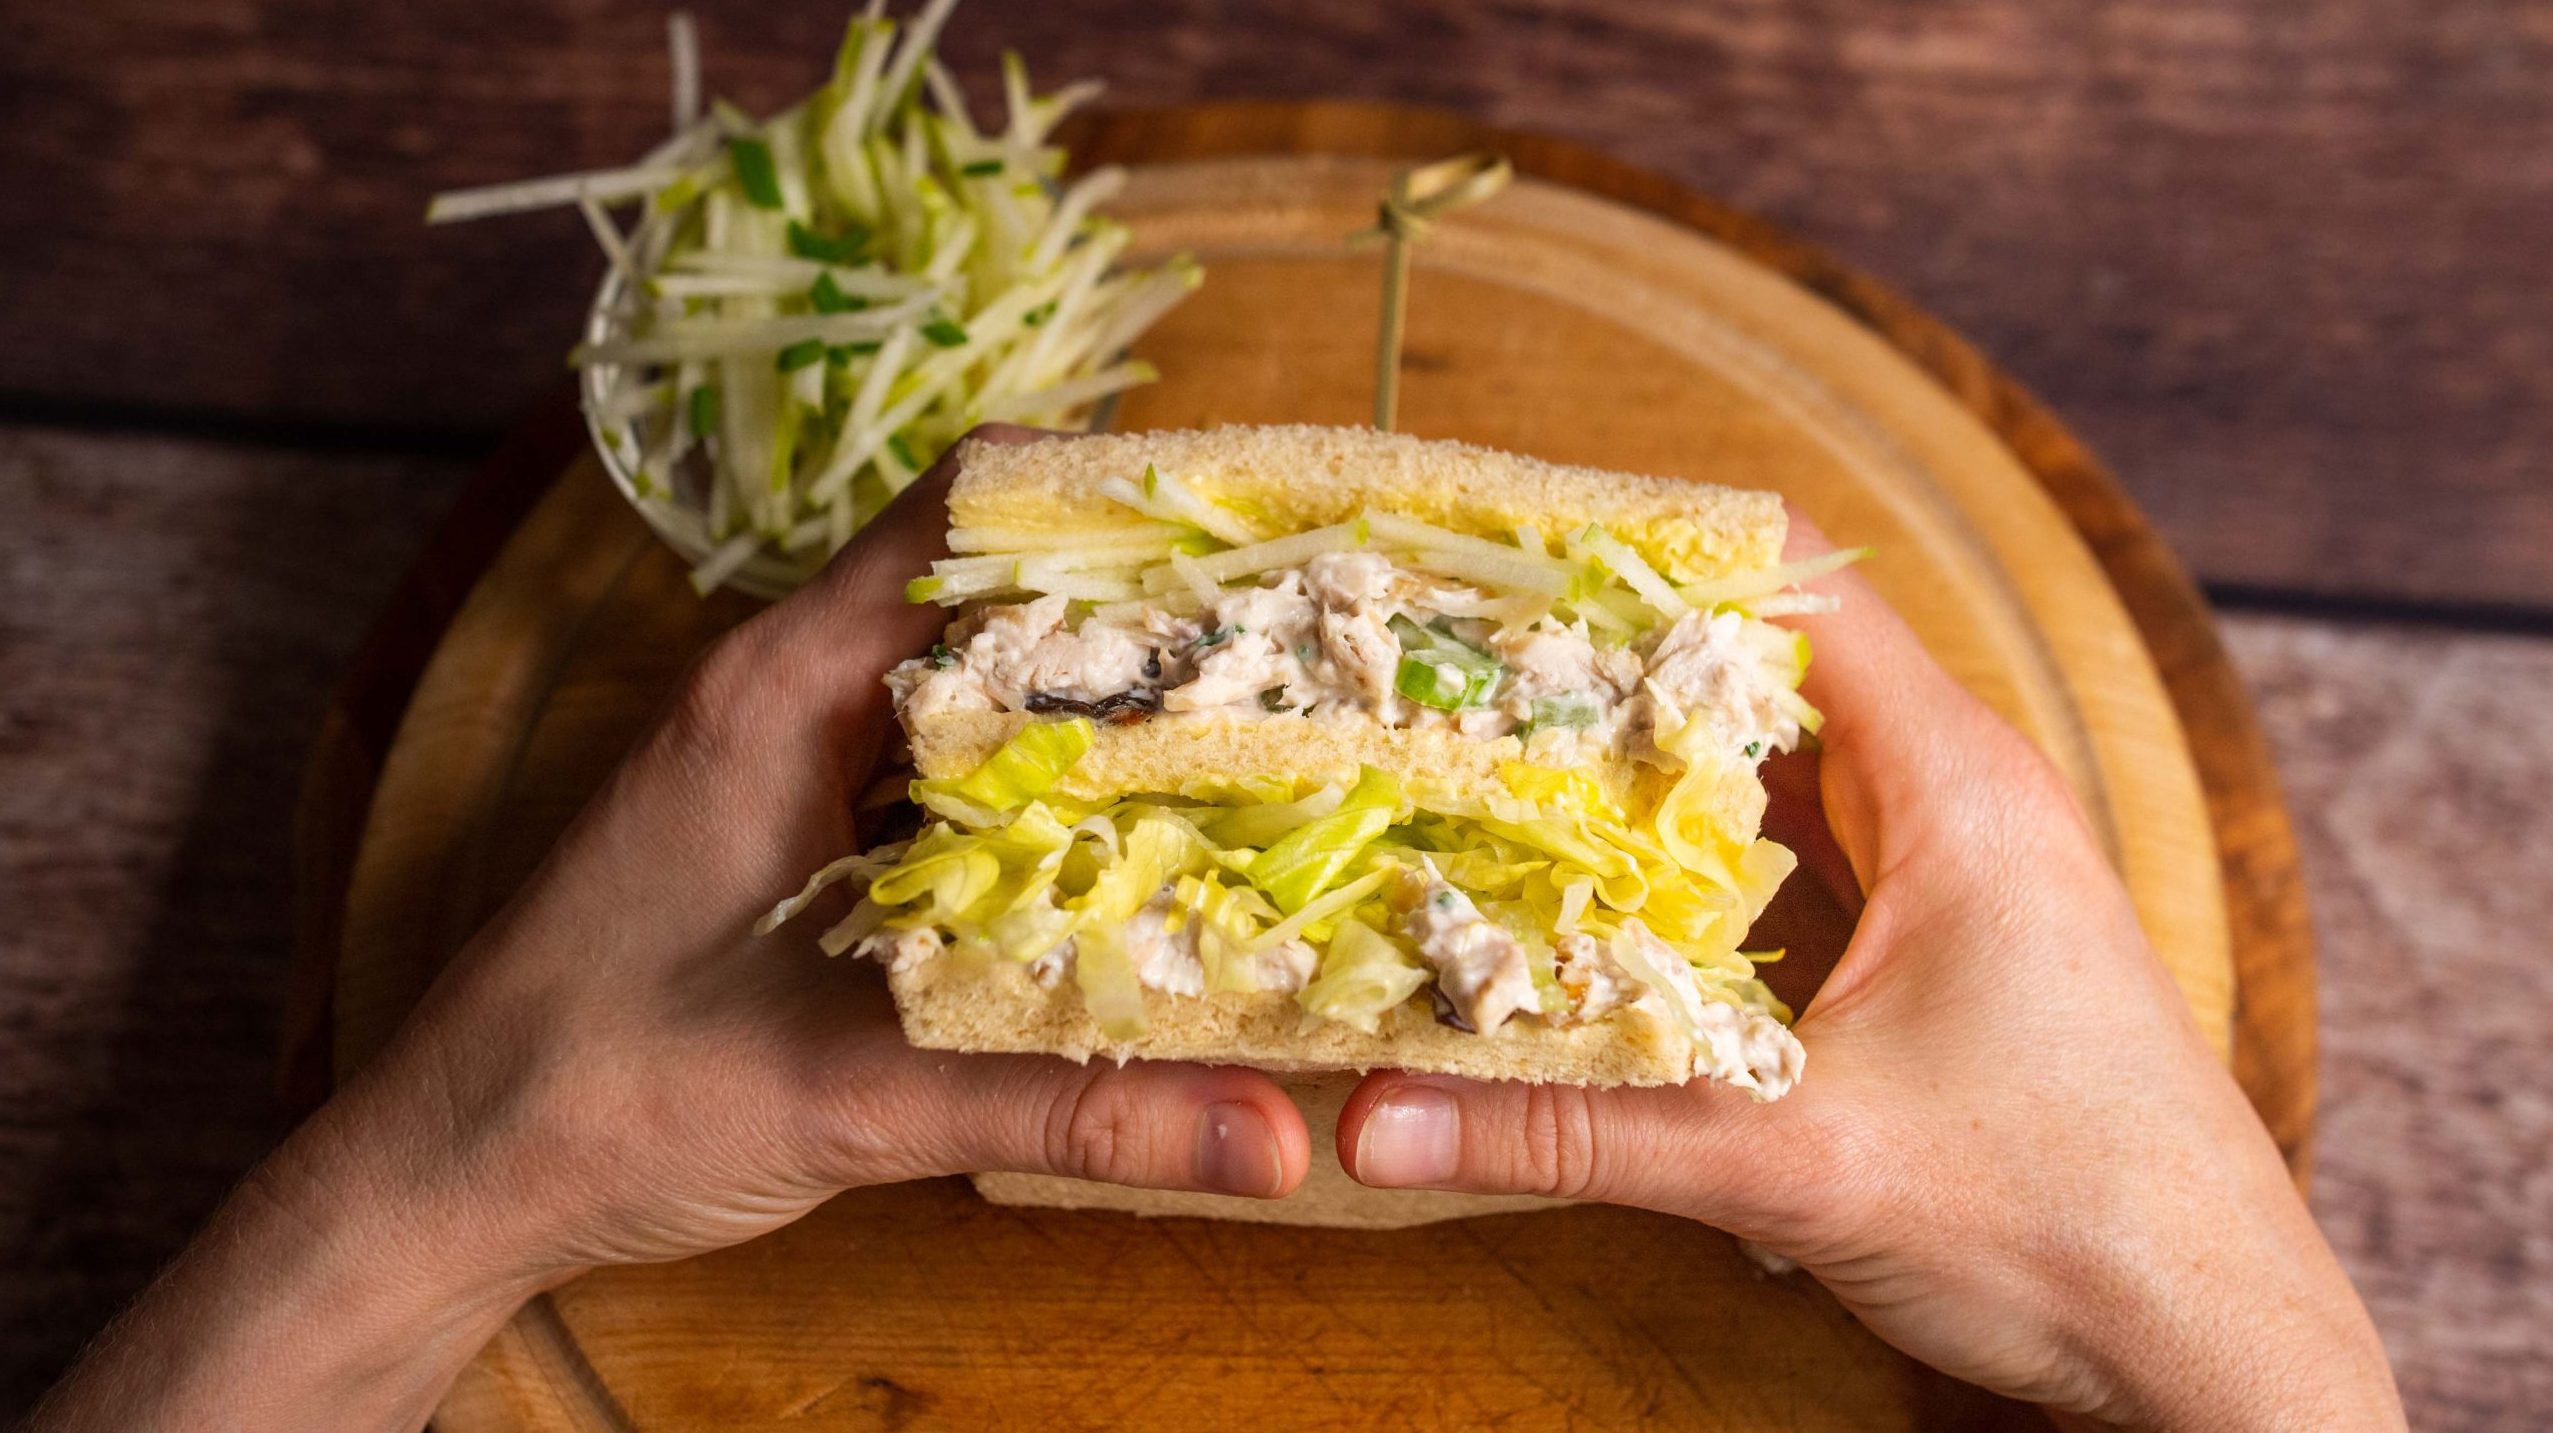 Chicken Waldorf salad club sandwich, close-up view held over a circular wooden cutting board, ready for a bite.